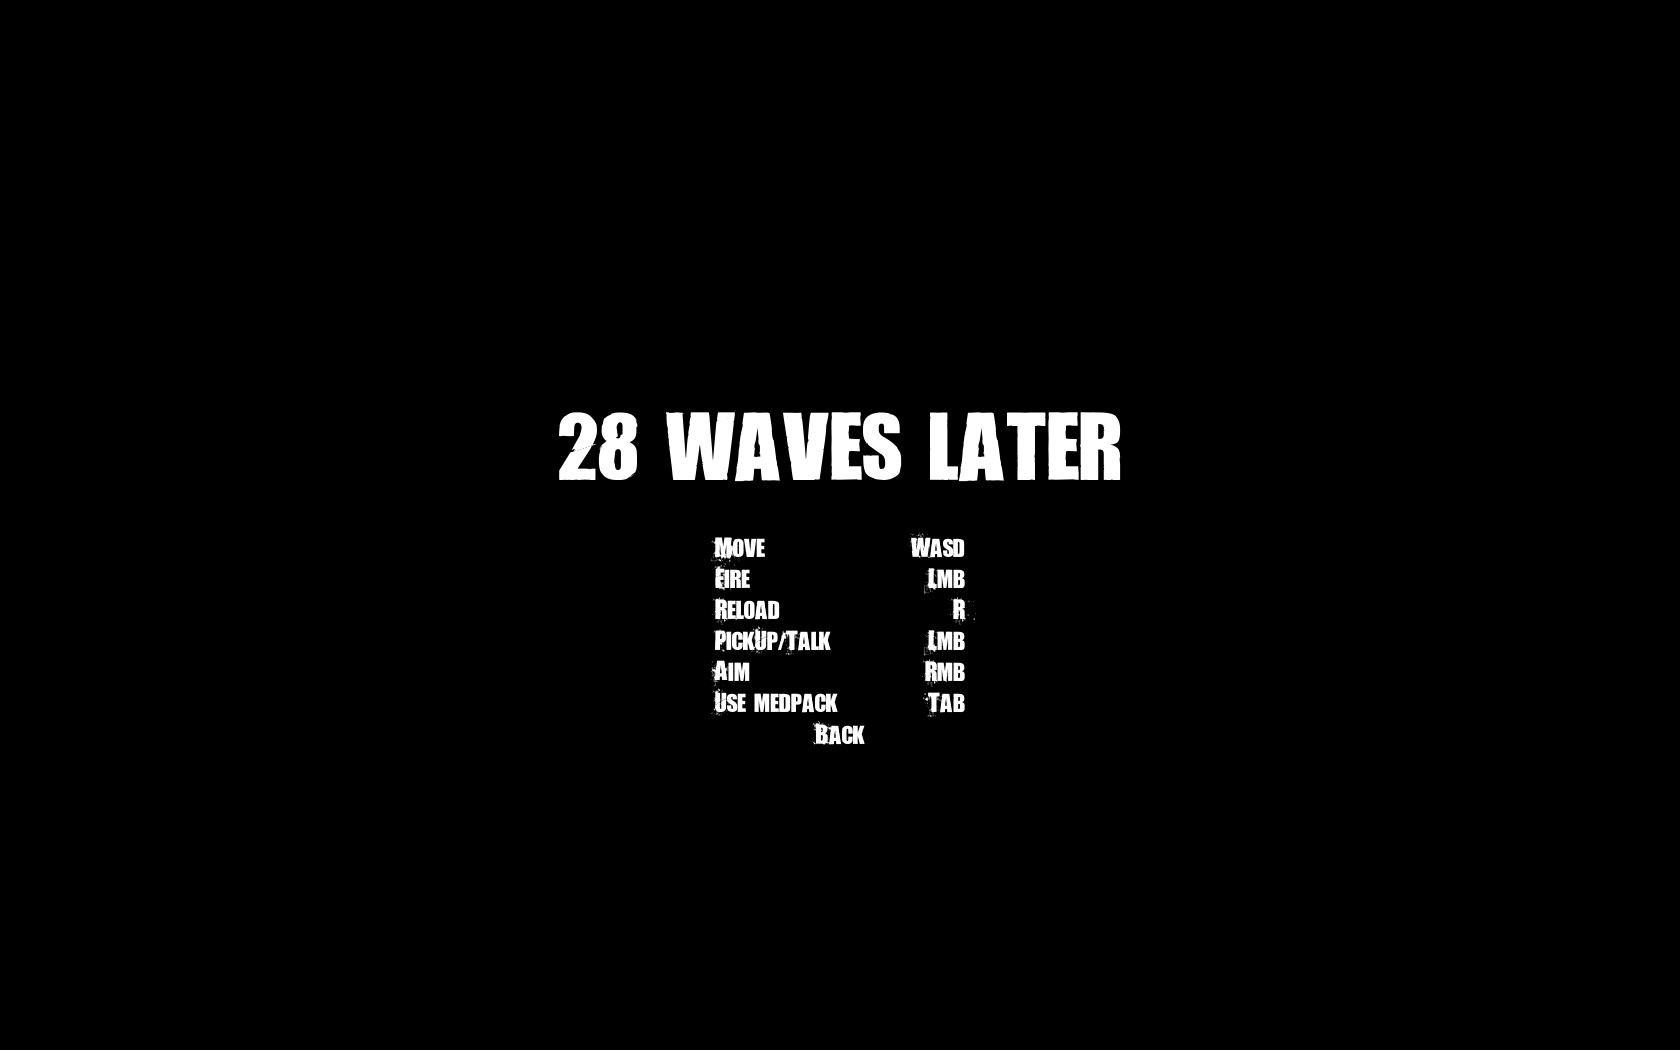 28 Waves Later游戏评测20180914003